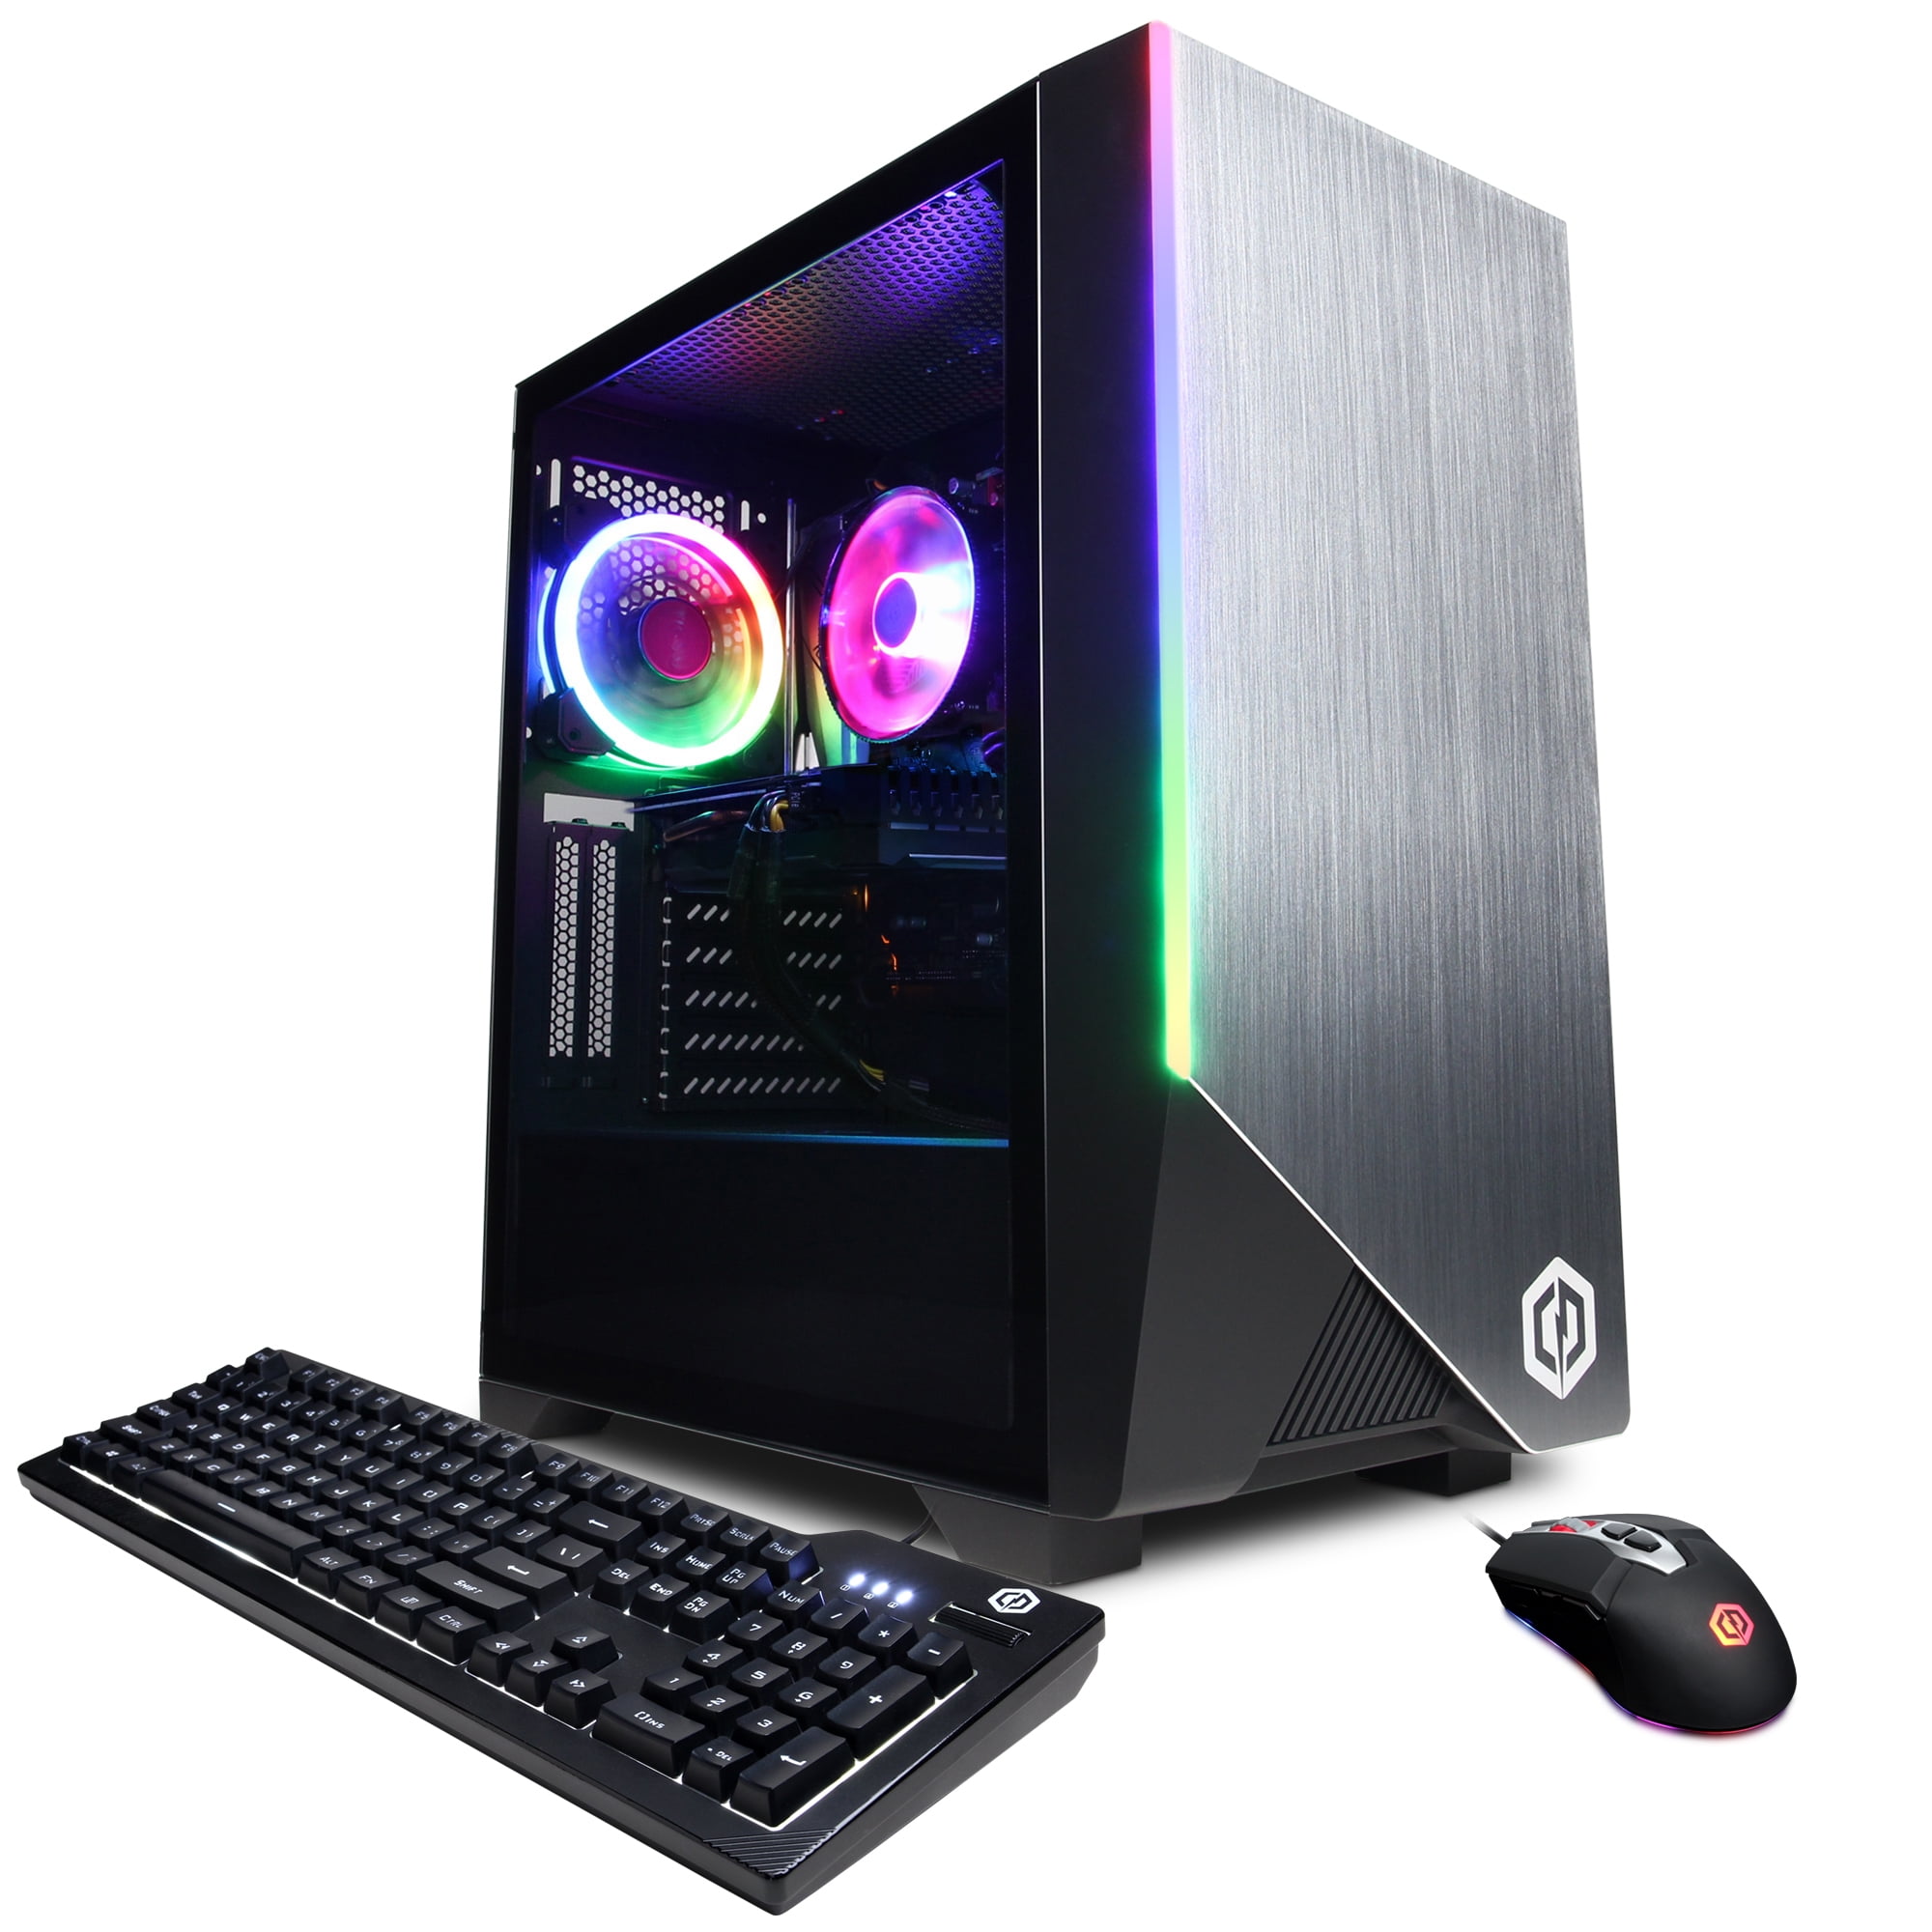 CyberPowerPC GMA4000BST Review: An Affordable Starter Gaming PC